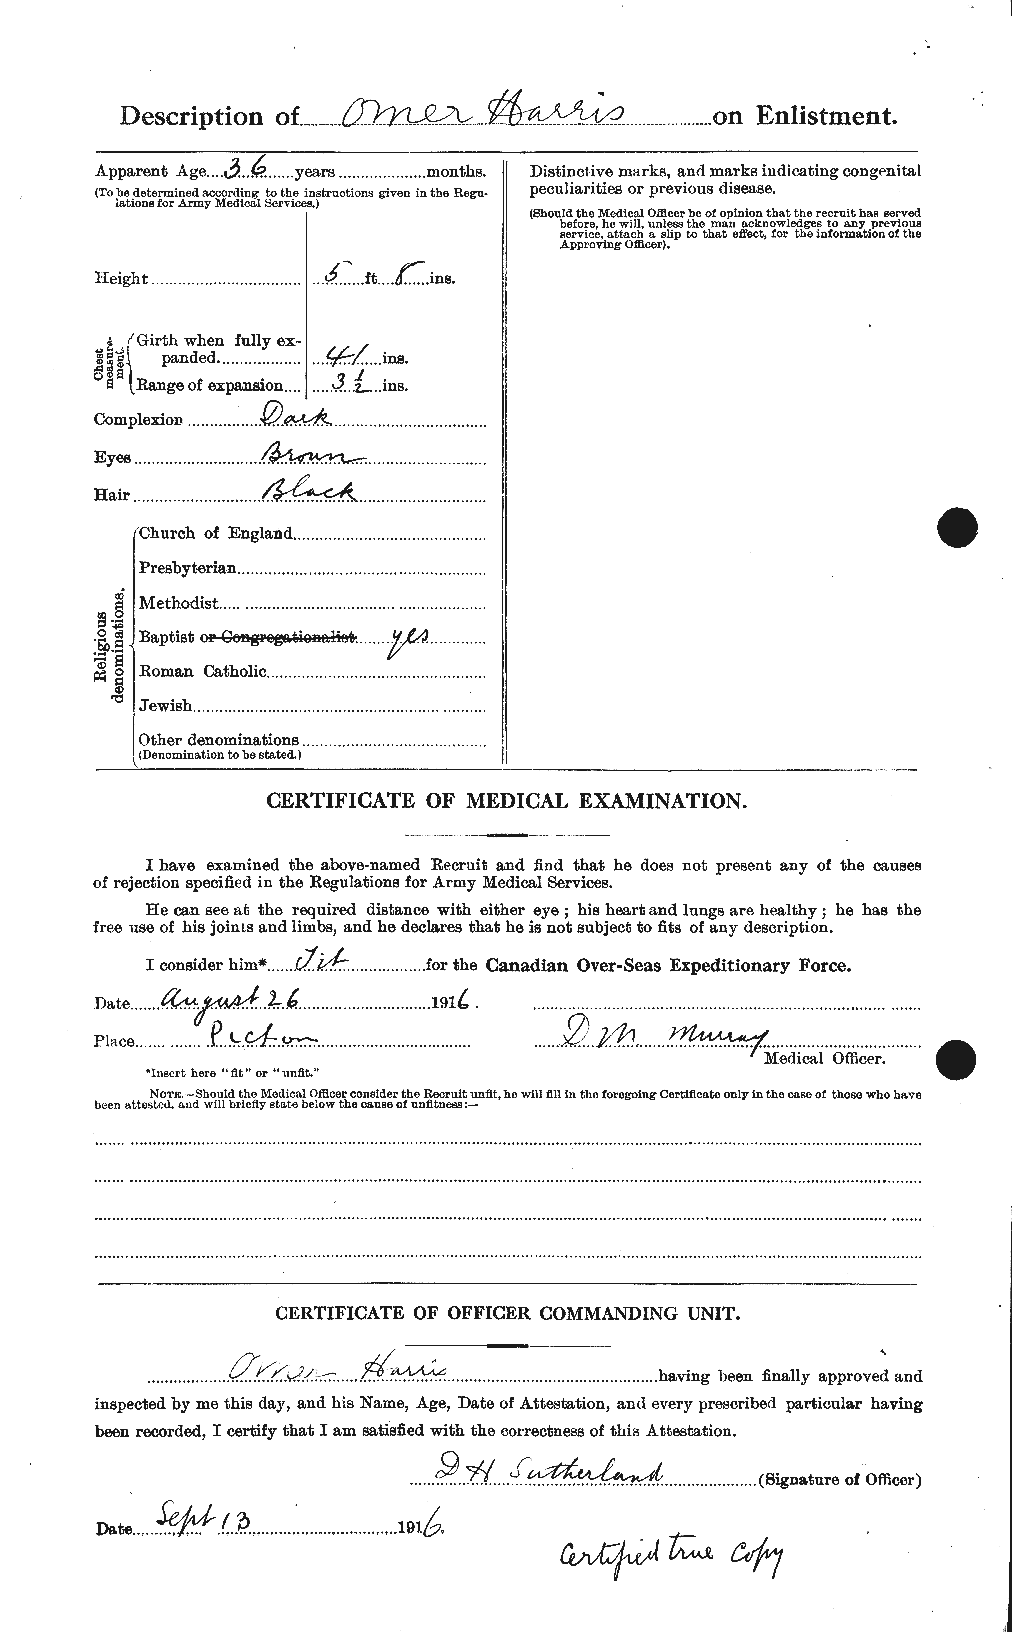 Personnel Records of the First World War - CEF 378086b